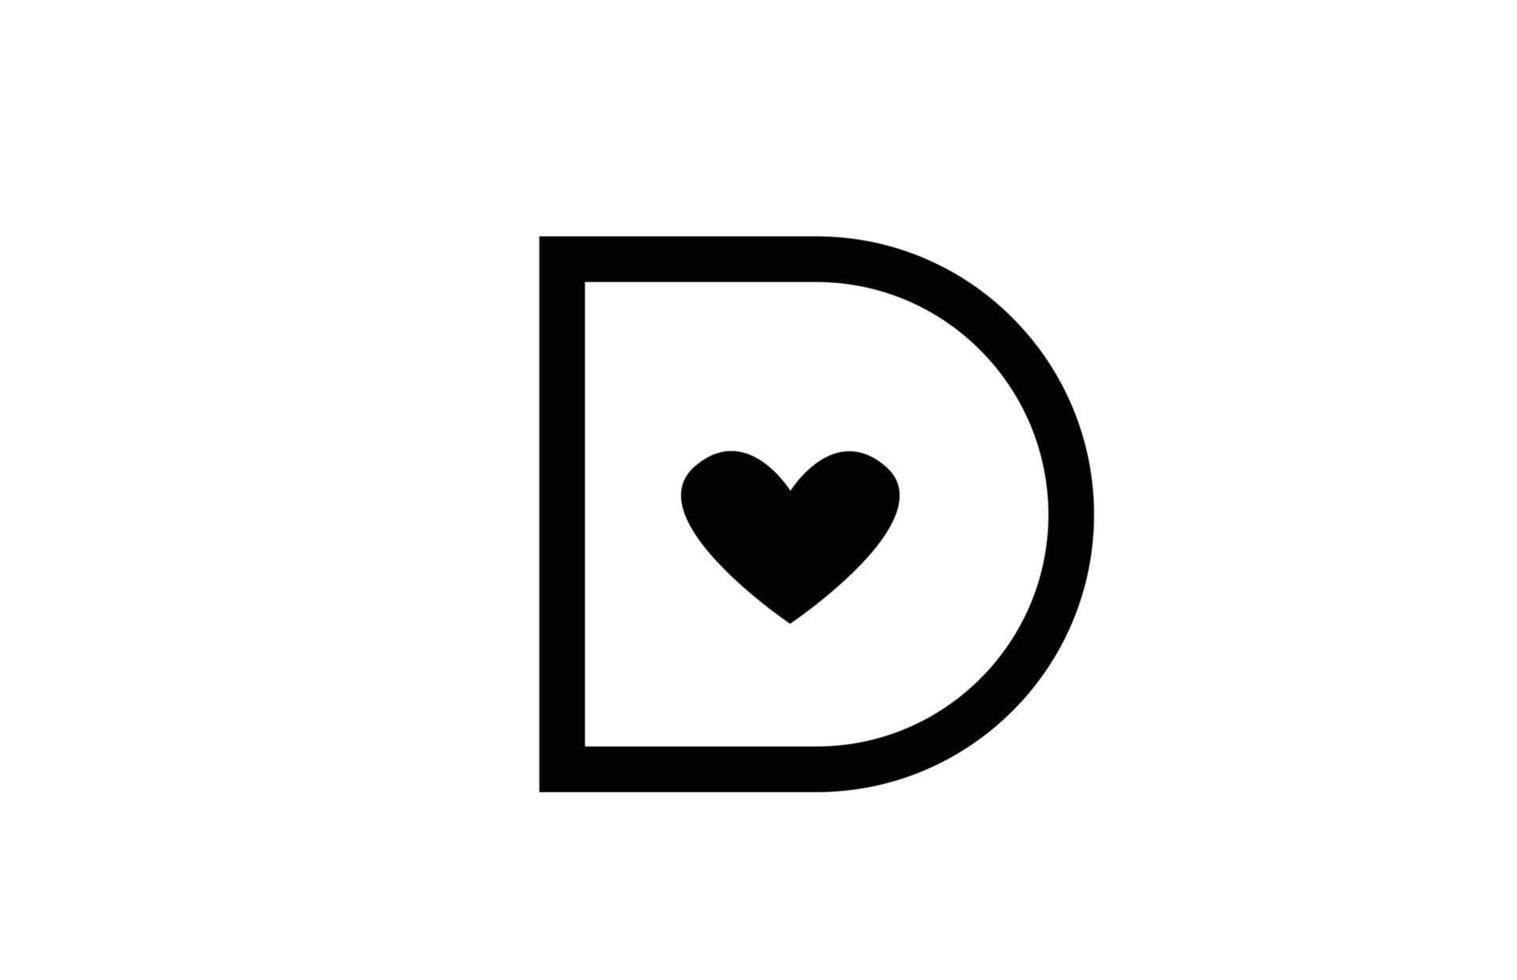 D love heart alphabet letter icon logo with black and white color ...